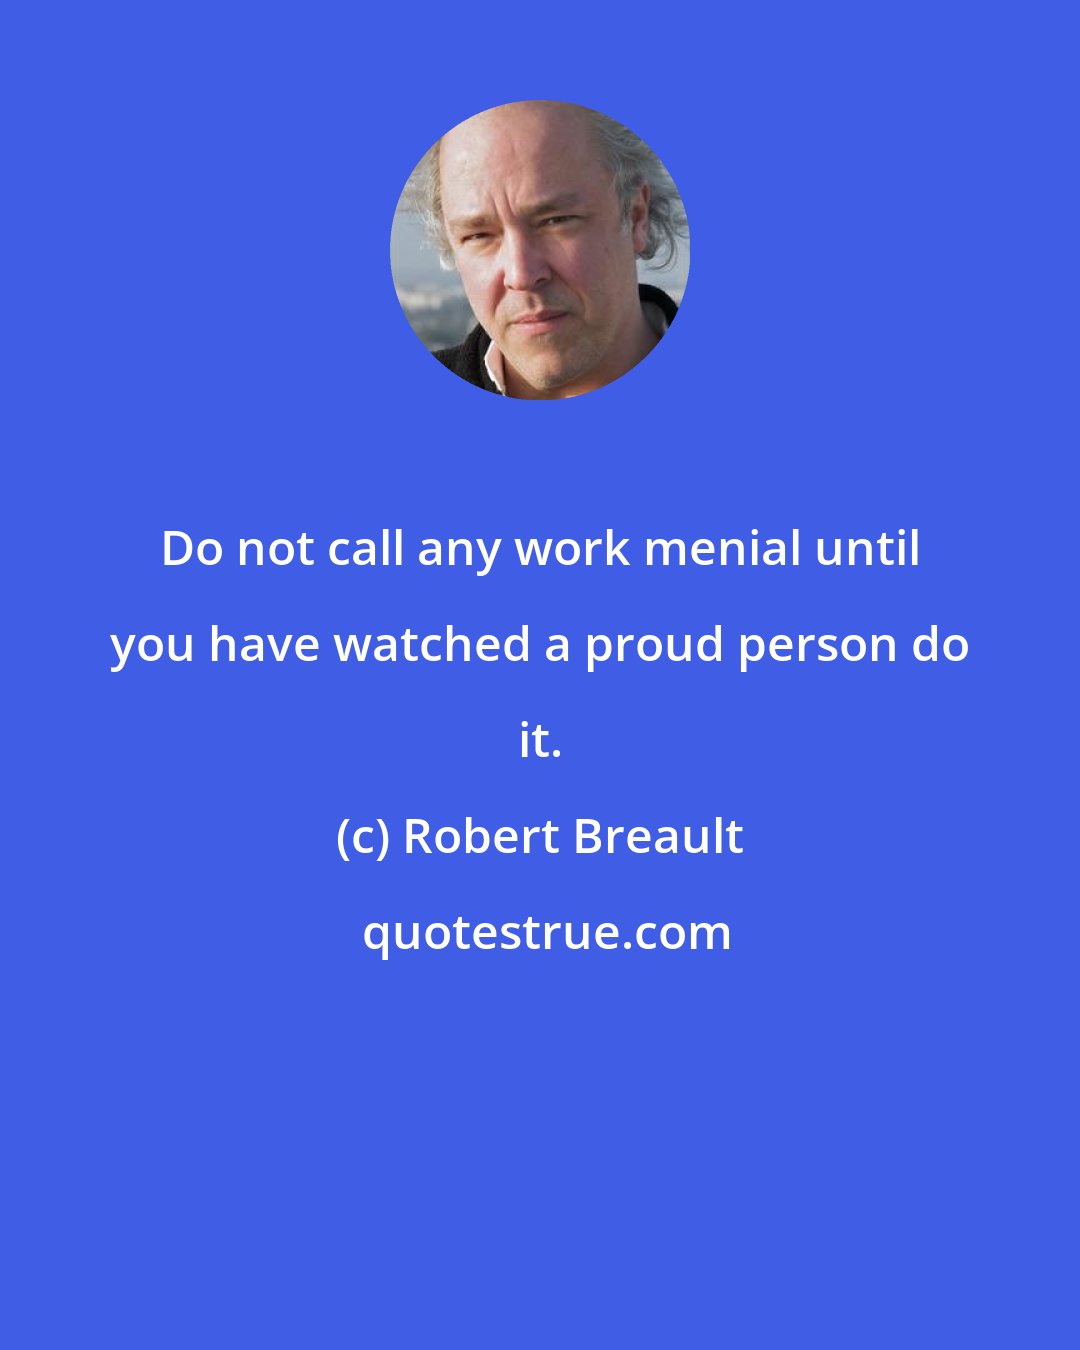 Robert Breault: Do not call any work menial until you have watched a proud person do it.